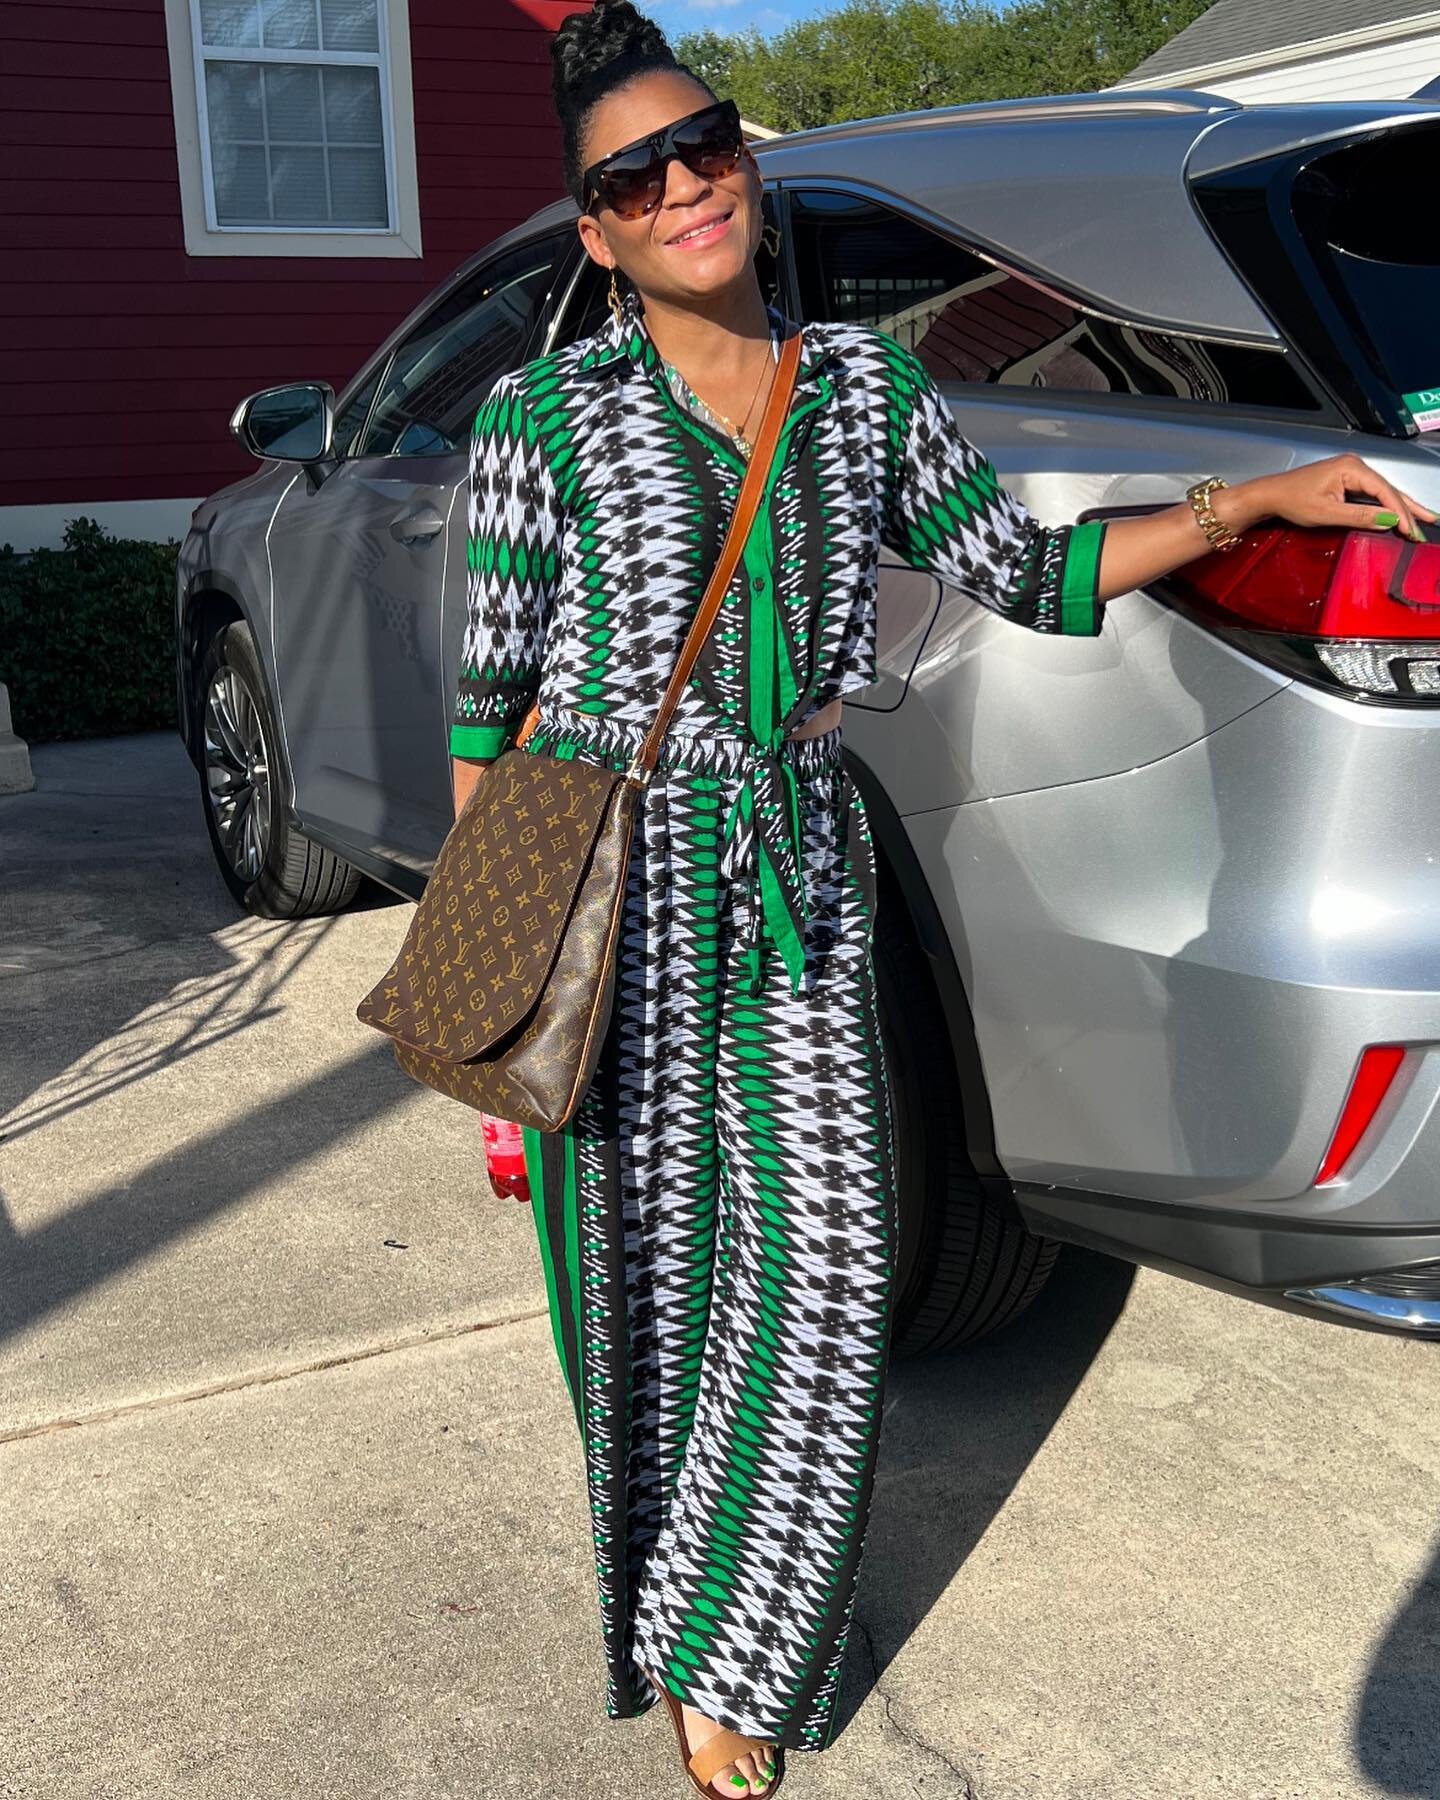 While I&rsquo;m Kenya, the Kenyan Queen @kq.kenyanqueen made me this outfit. 💚 It&rsquo;s cute and comfy. Thanks Angela you did that. I&rsquo;m about to live in the set.